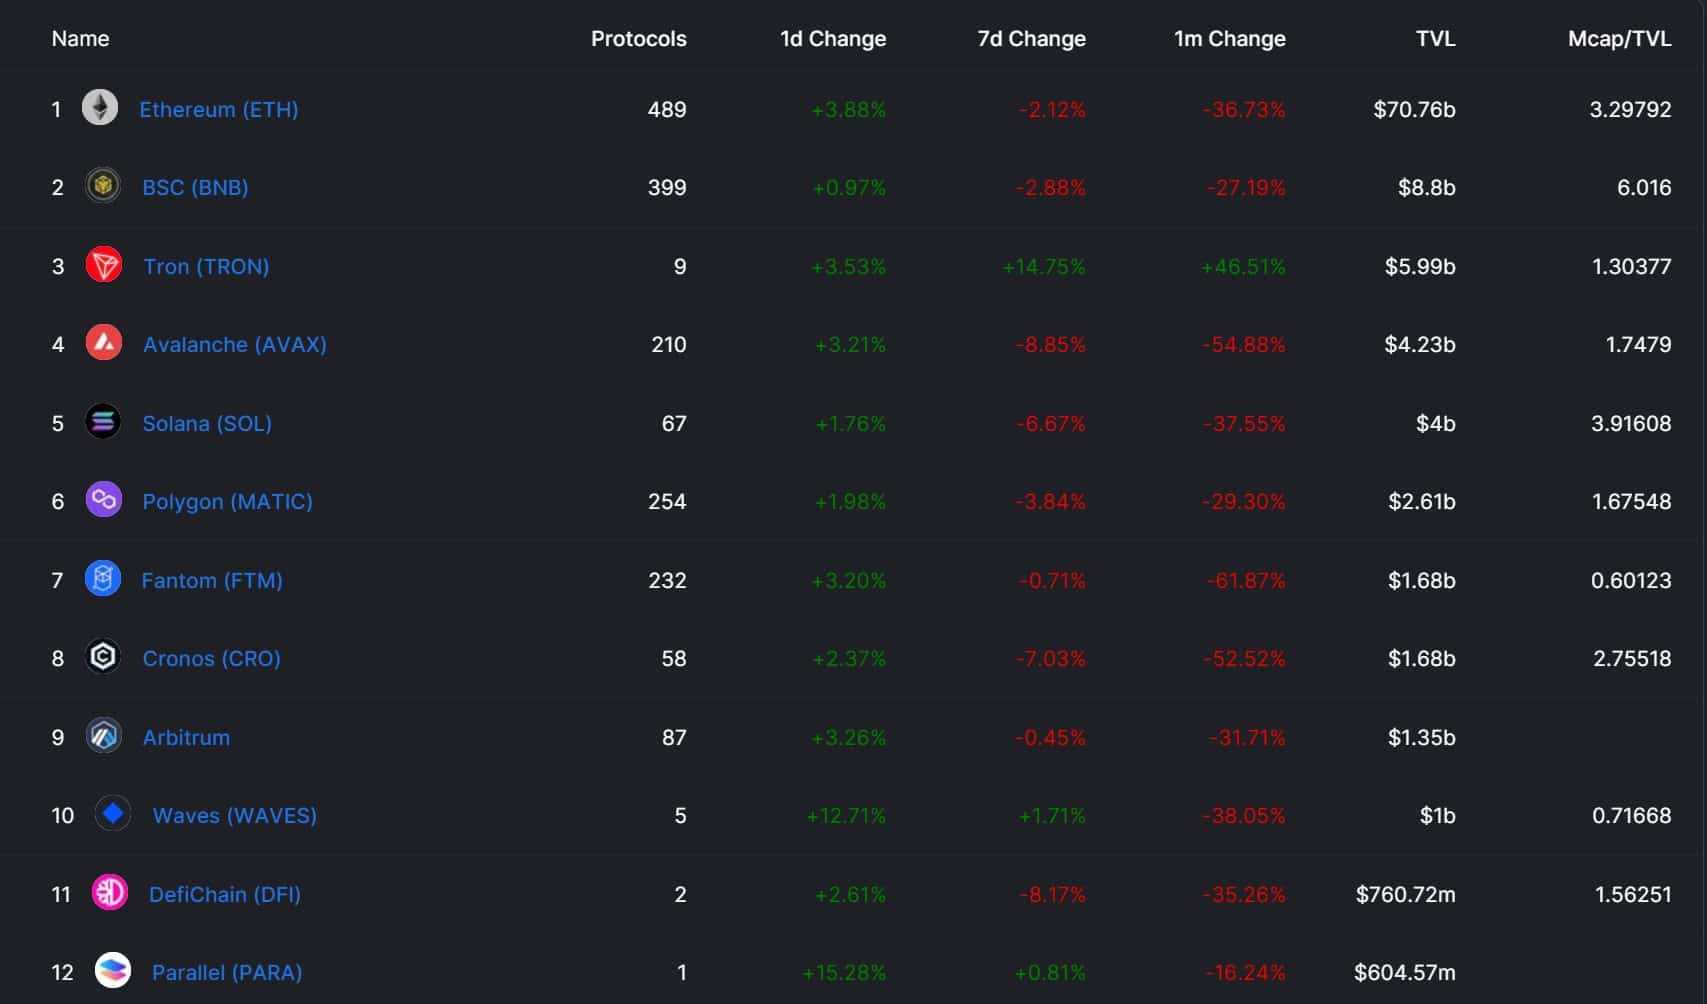 Tron Passes AVAX and SOL in TVL, Claiming 3rd Spot After 40% Increase